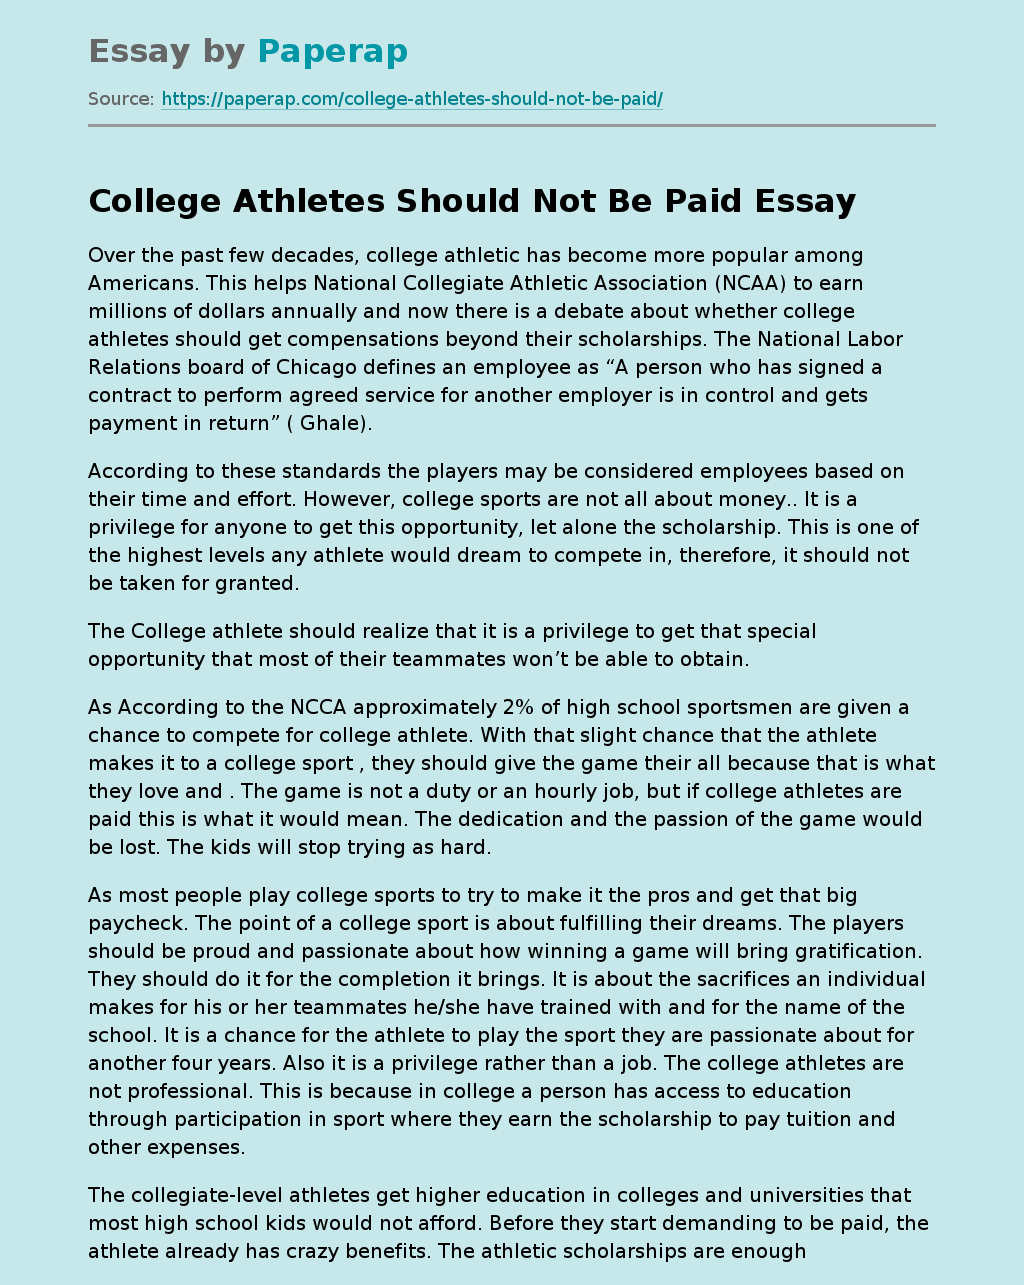 College Athletes Should Not Be Paid